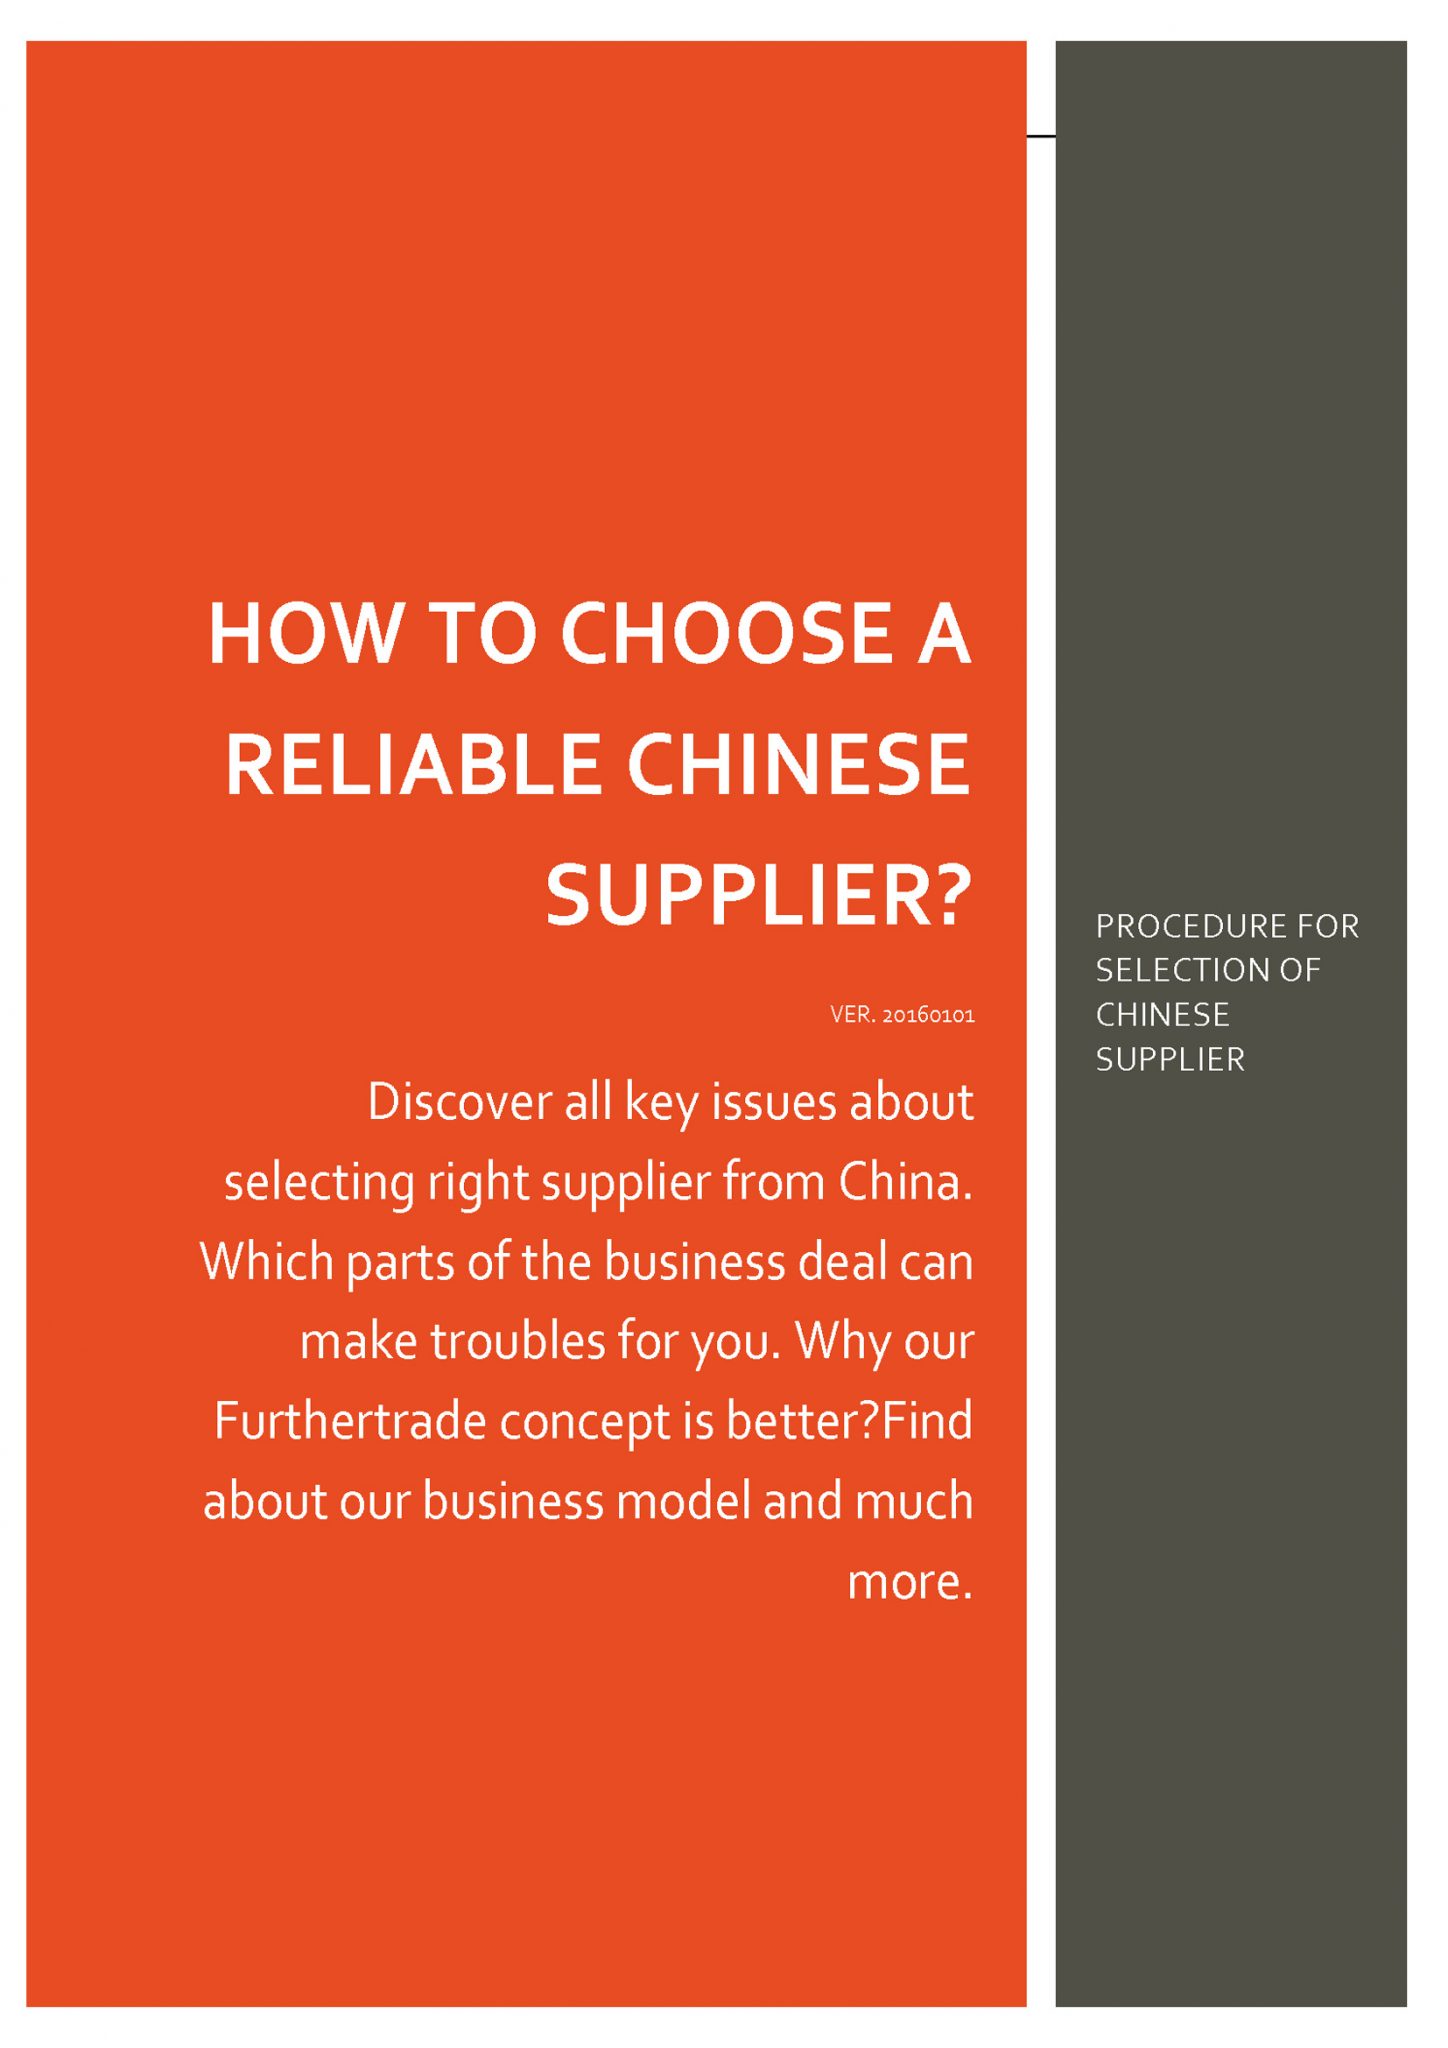 HOW TO CHOOSE A RELIABLE CHINESE SUPPLIER furthertrade.com Furthertrade.com the most reliable raincoat manufacturers and suppliers